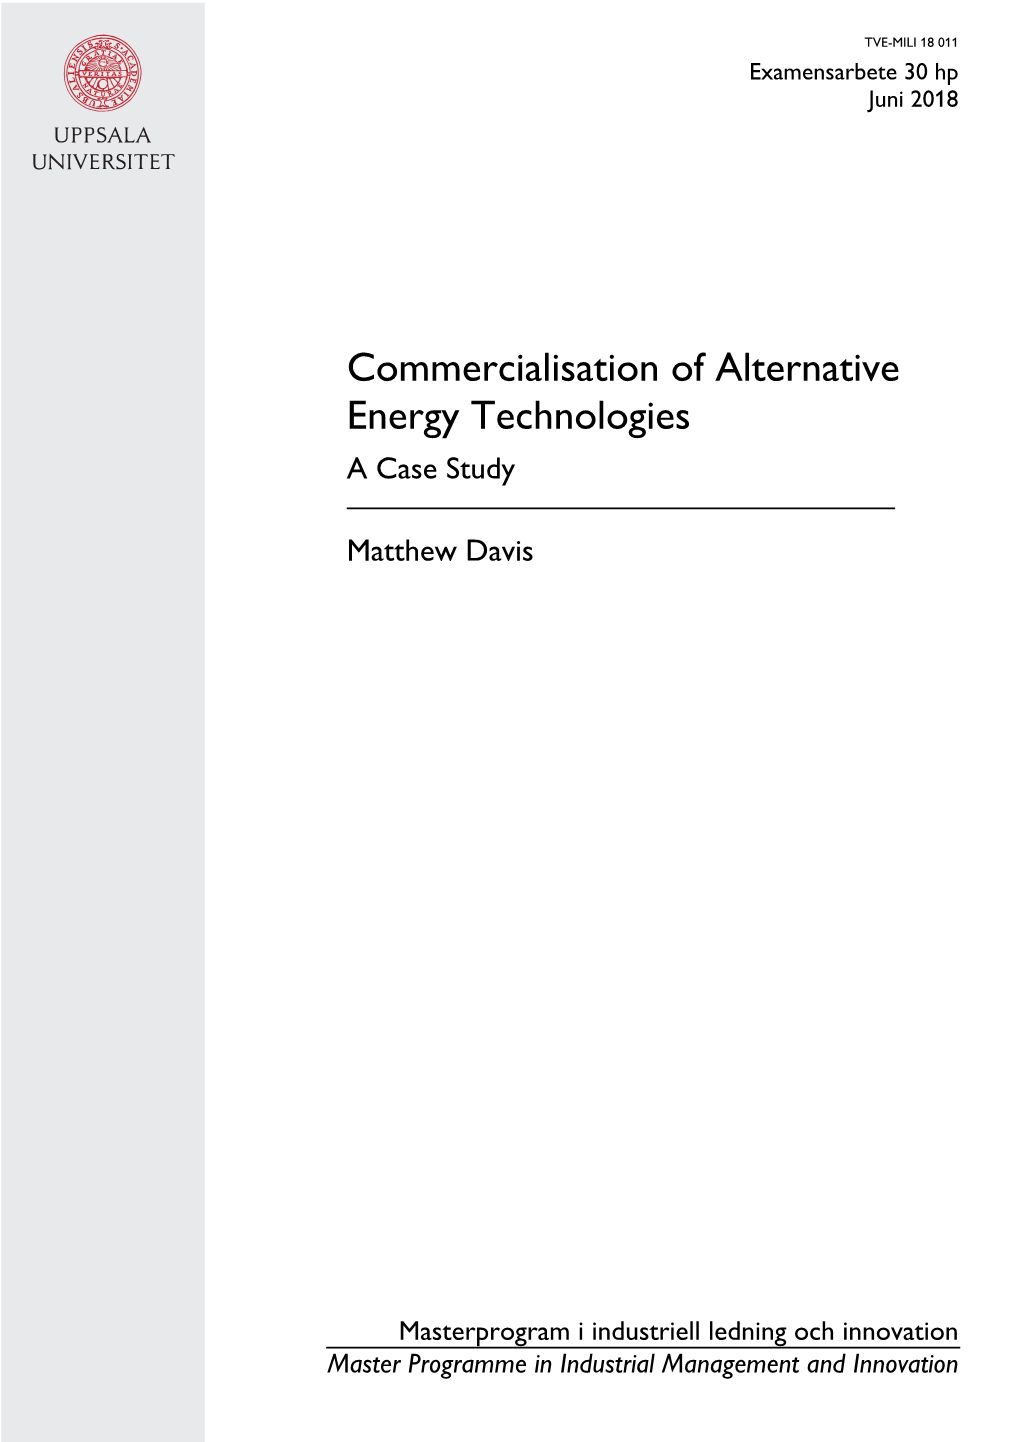 Commercialisation of Alternative Energy Technologies a Case Study